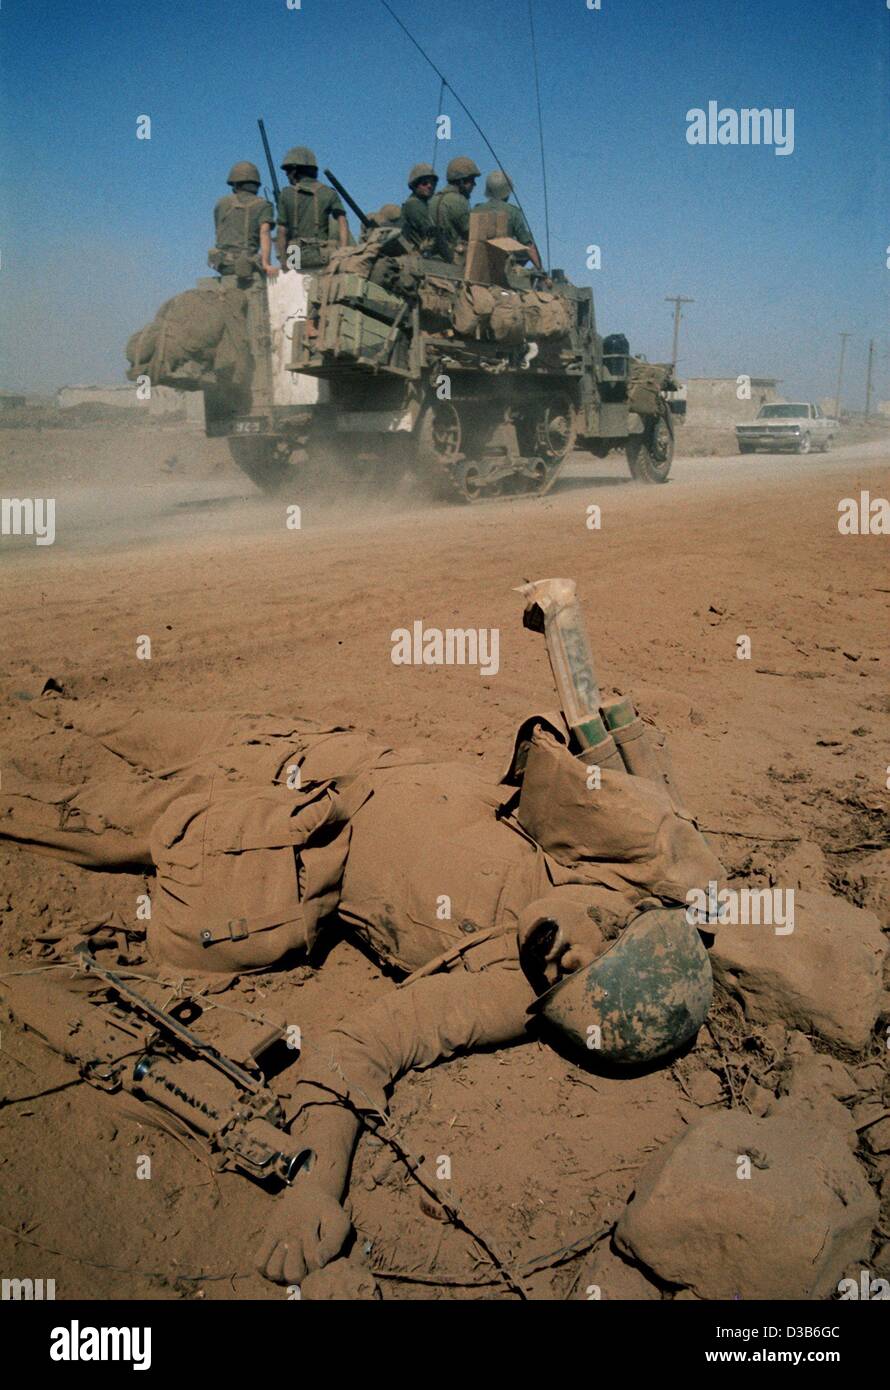 (dpa files) - An Israeli military vehicle drives past a fallen Syrian soldier on Syrian territory in the direction to Damaskus, during the 4th Israeli-Arab War in 1973. On 6 October 1973, the Jewish high holiday of Yom Kippur, Egypt and Syria attacked Israel. The goal was to win back lost Arab terri Stock Photo